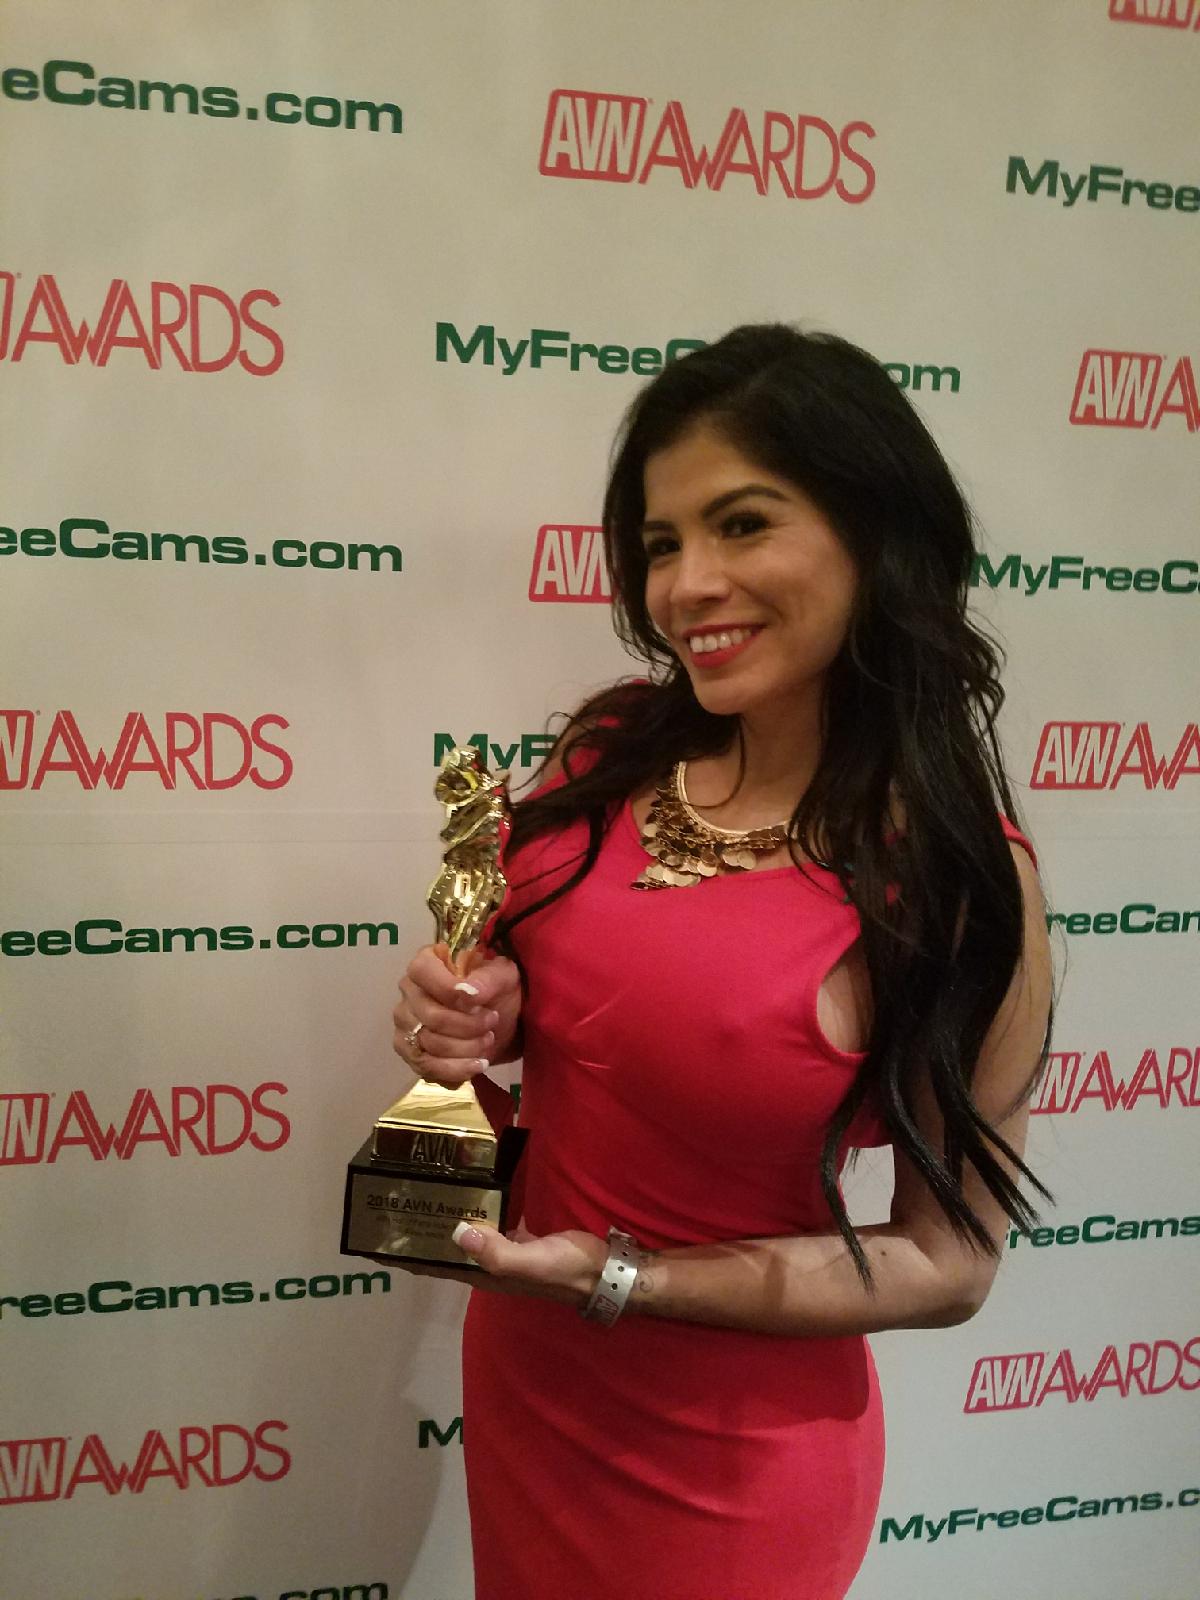 “Alexis Amore’s Fullfilling Week at AVN 2018”